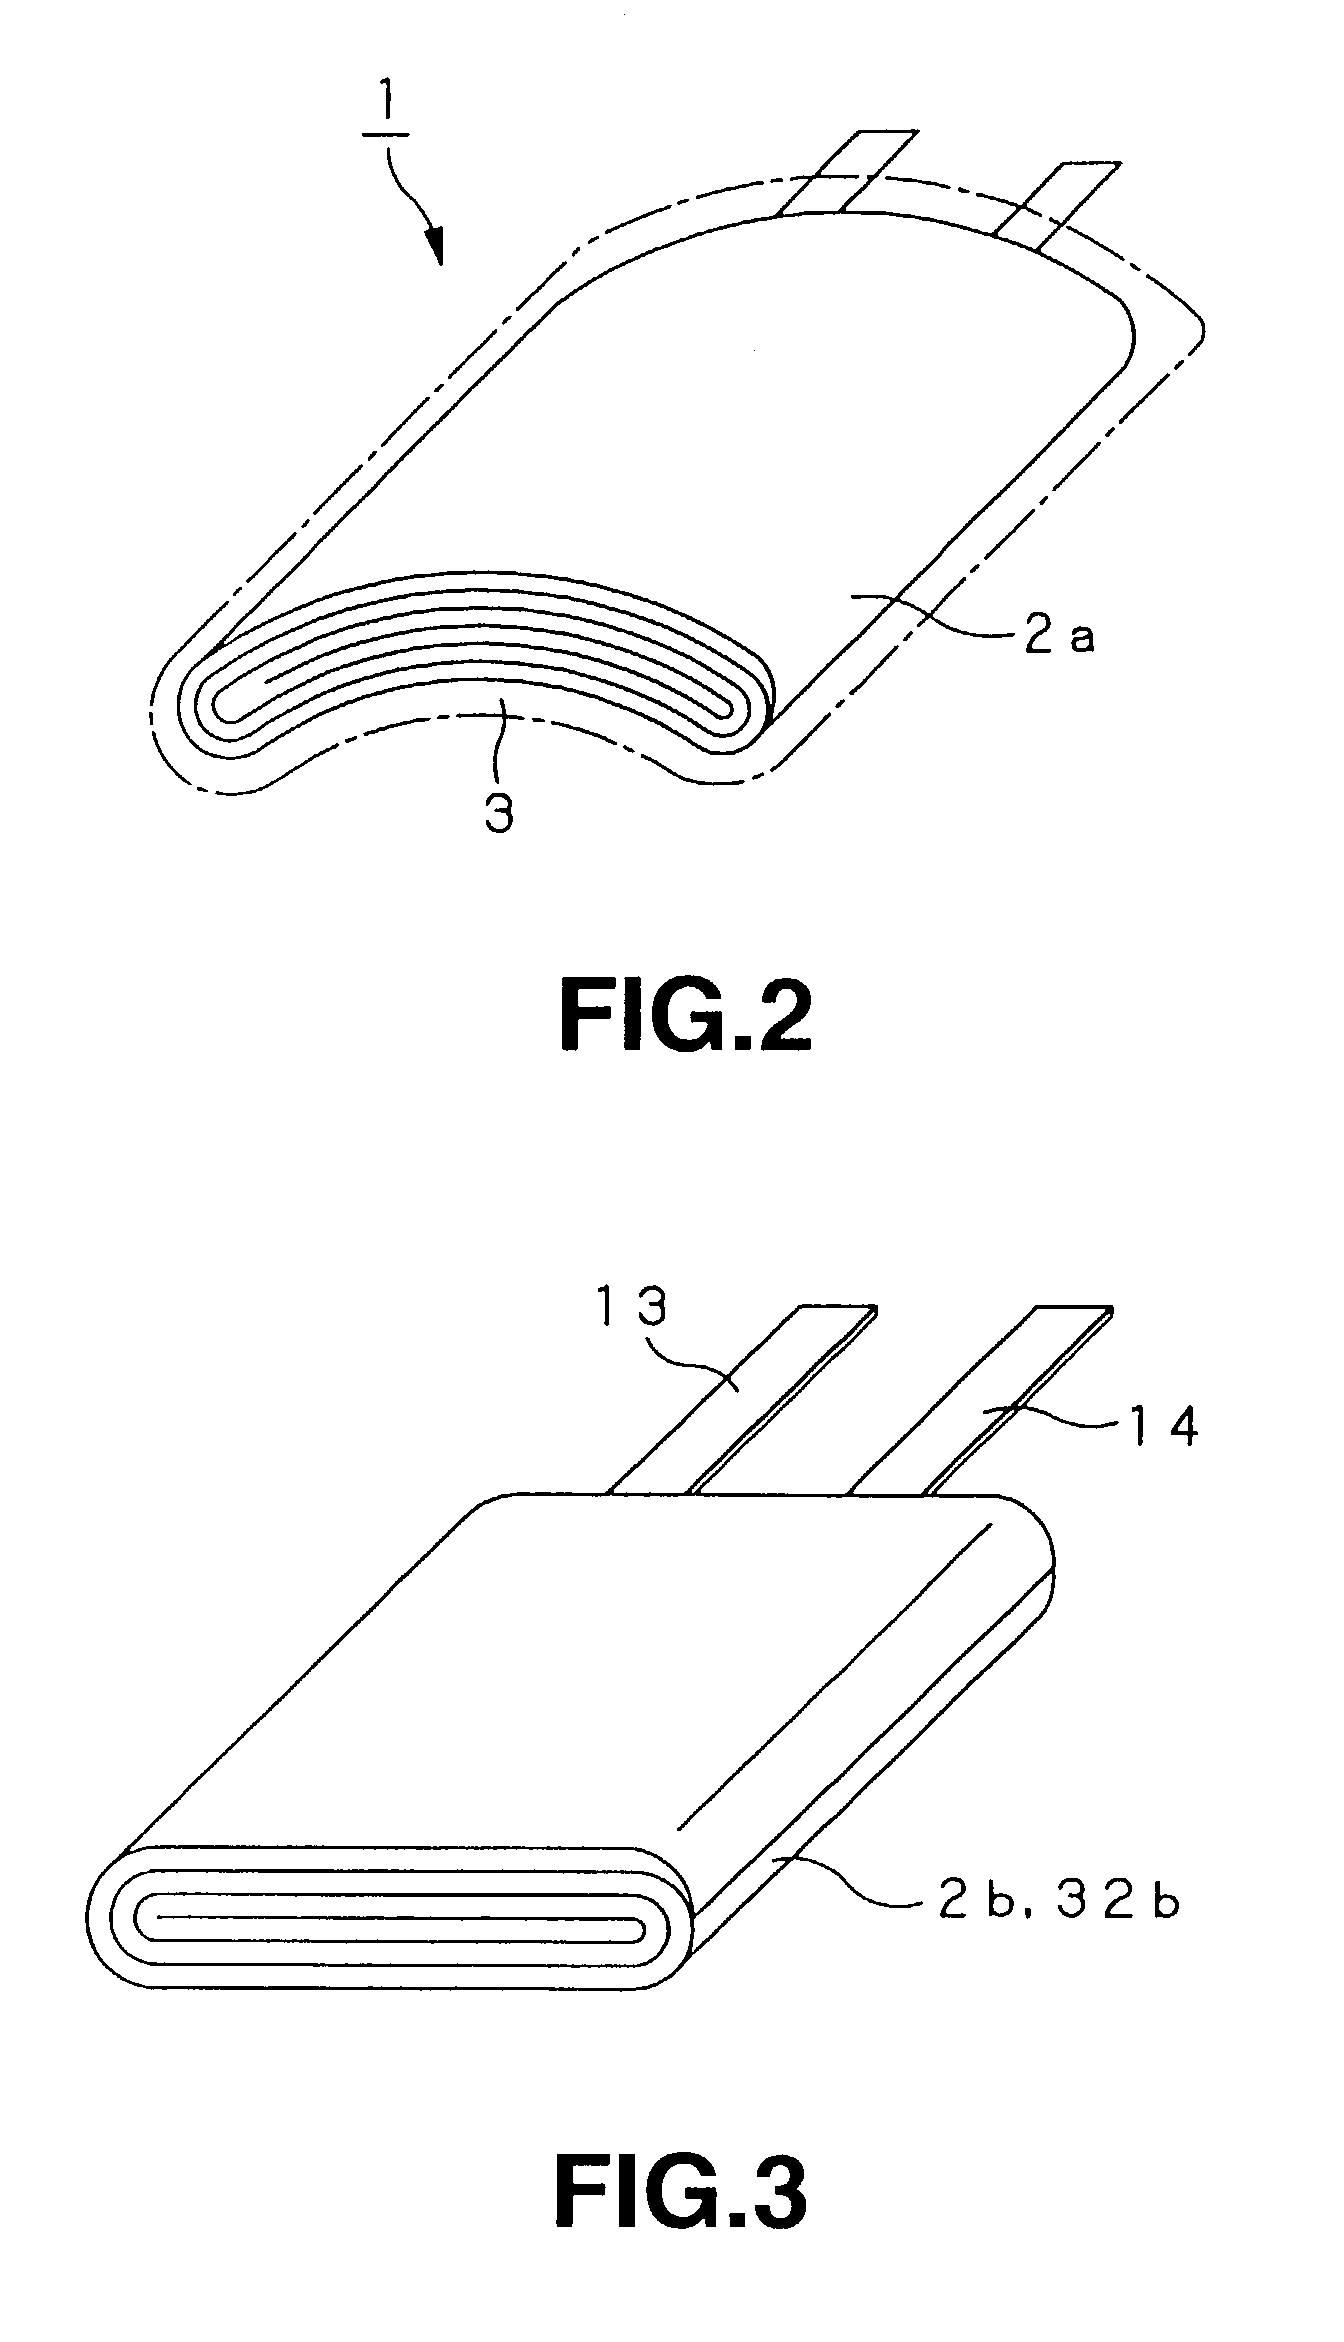 Polymer electrolyte battery and method of producing same